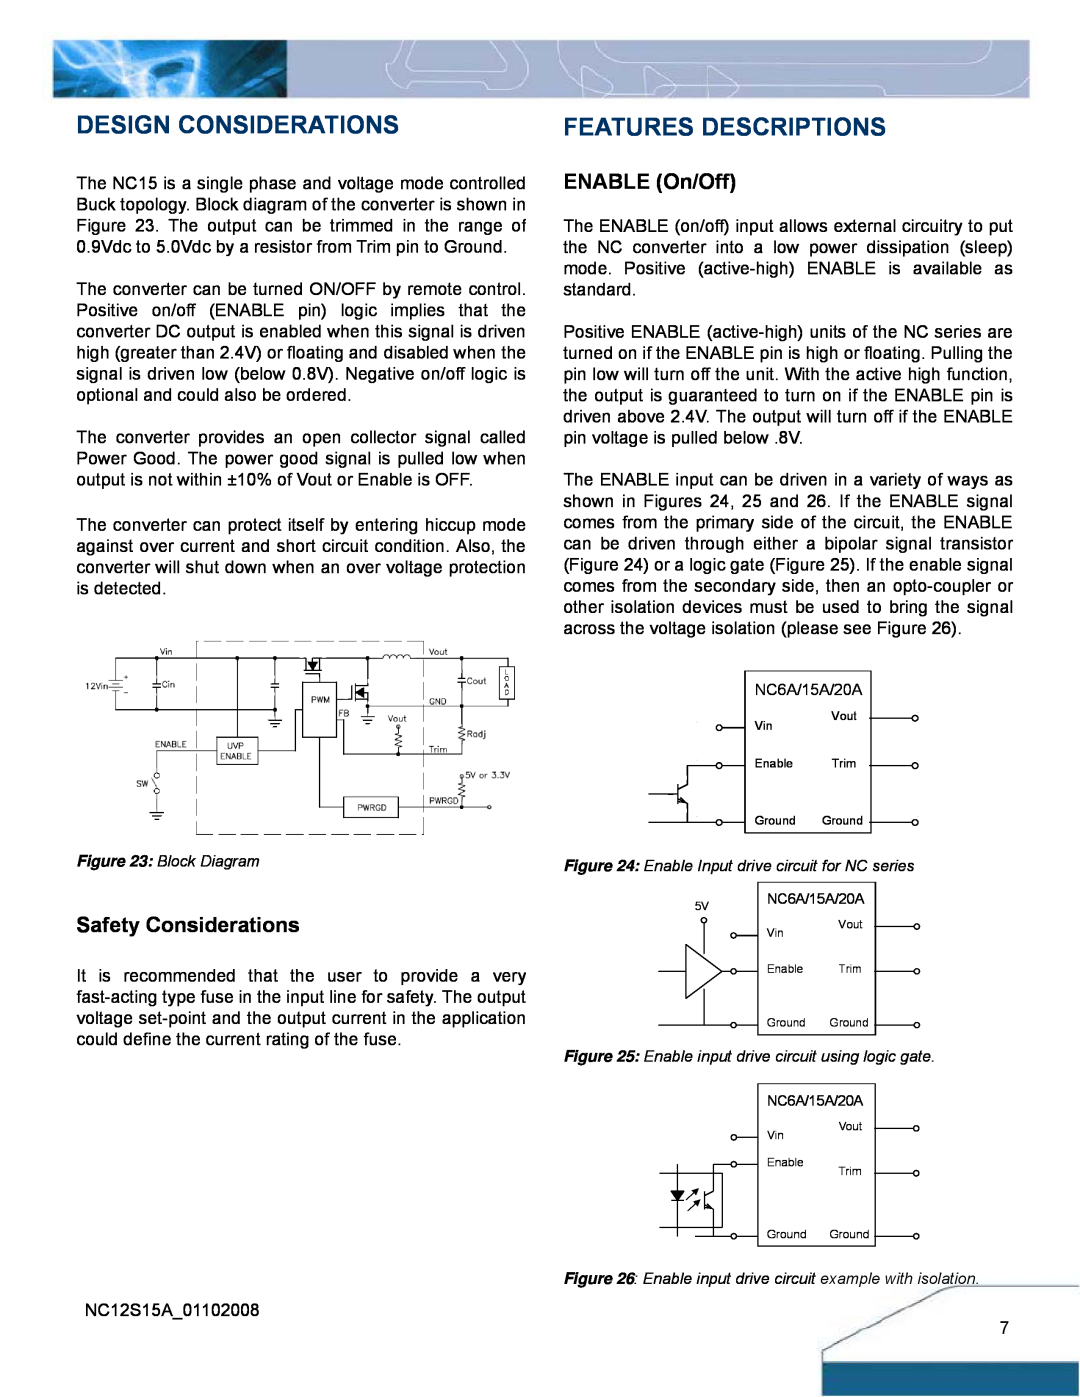 Delta Electronics NC15 Series manual Design Considerations, Features Descriptions, ENABLE On/Off, Safety Considerations 